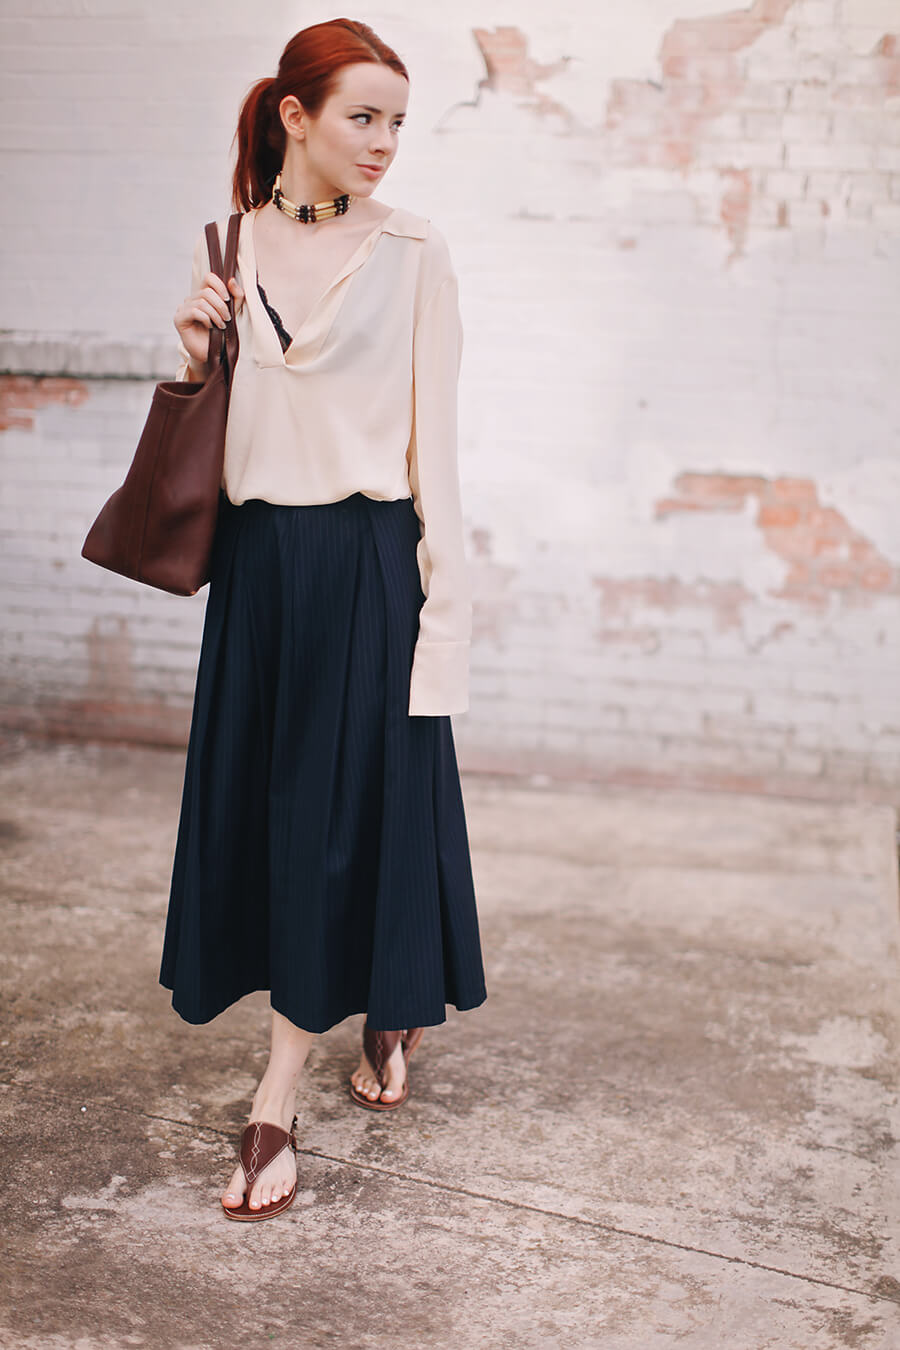 THE NAVY MIDI SKIRT - Sea of Shoes